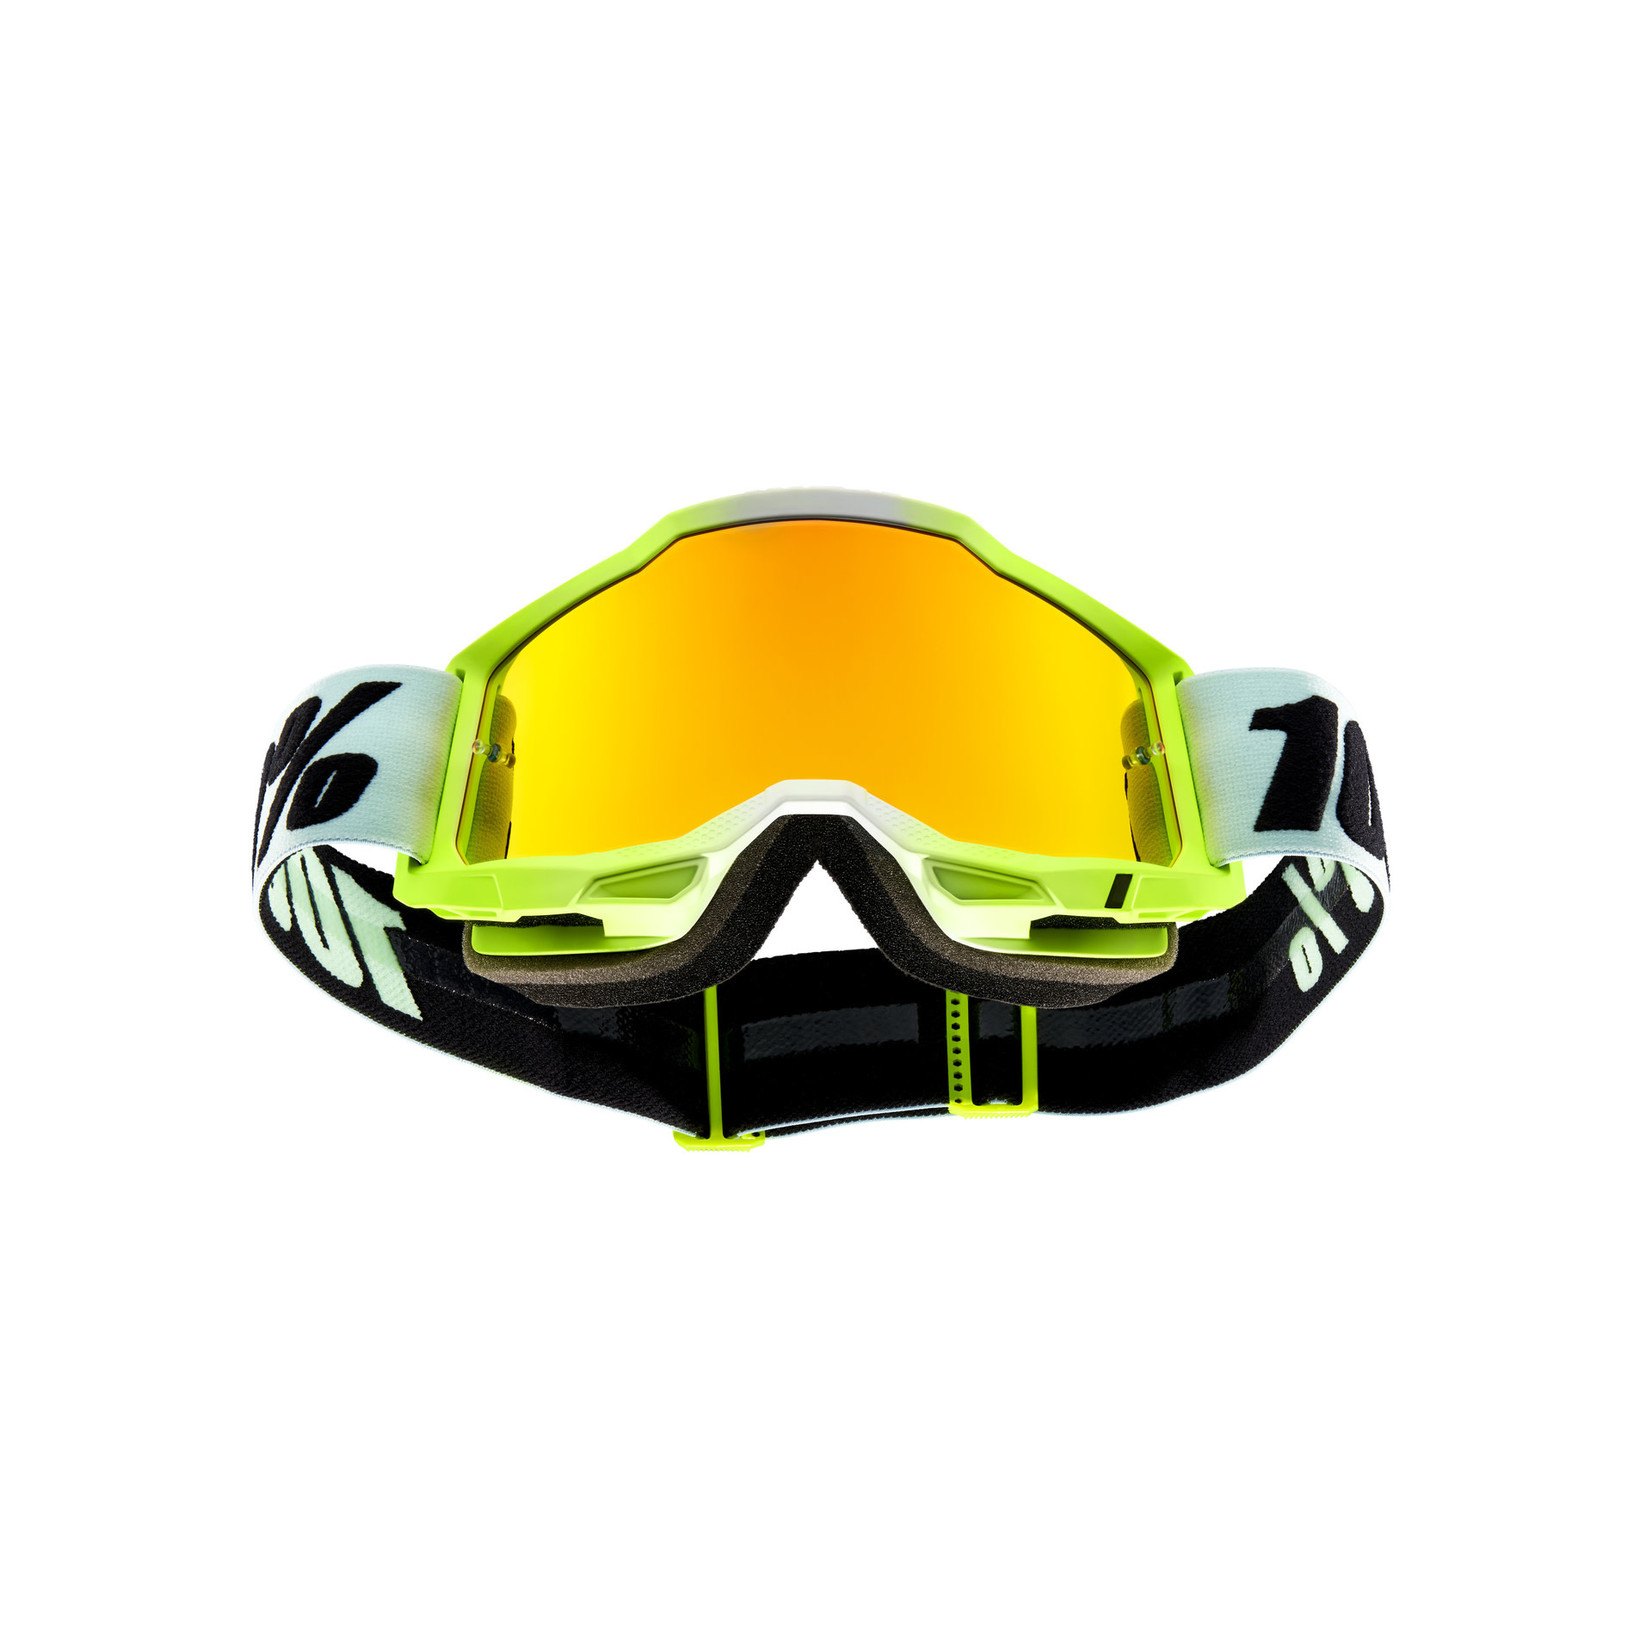 100 Percent 100% Accuri 2 Bike/Cycling Goggle - Dunder - Smoke Polycarbonate Lens